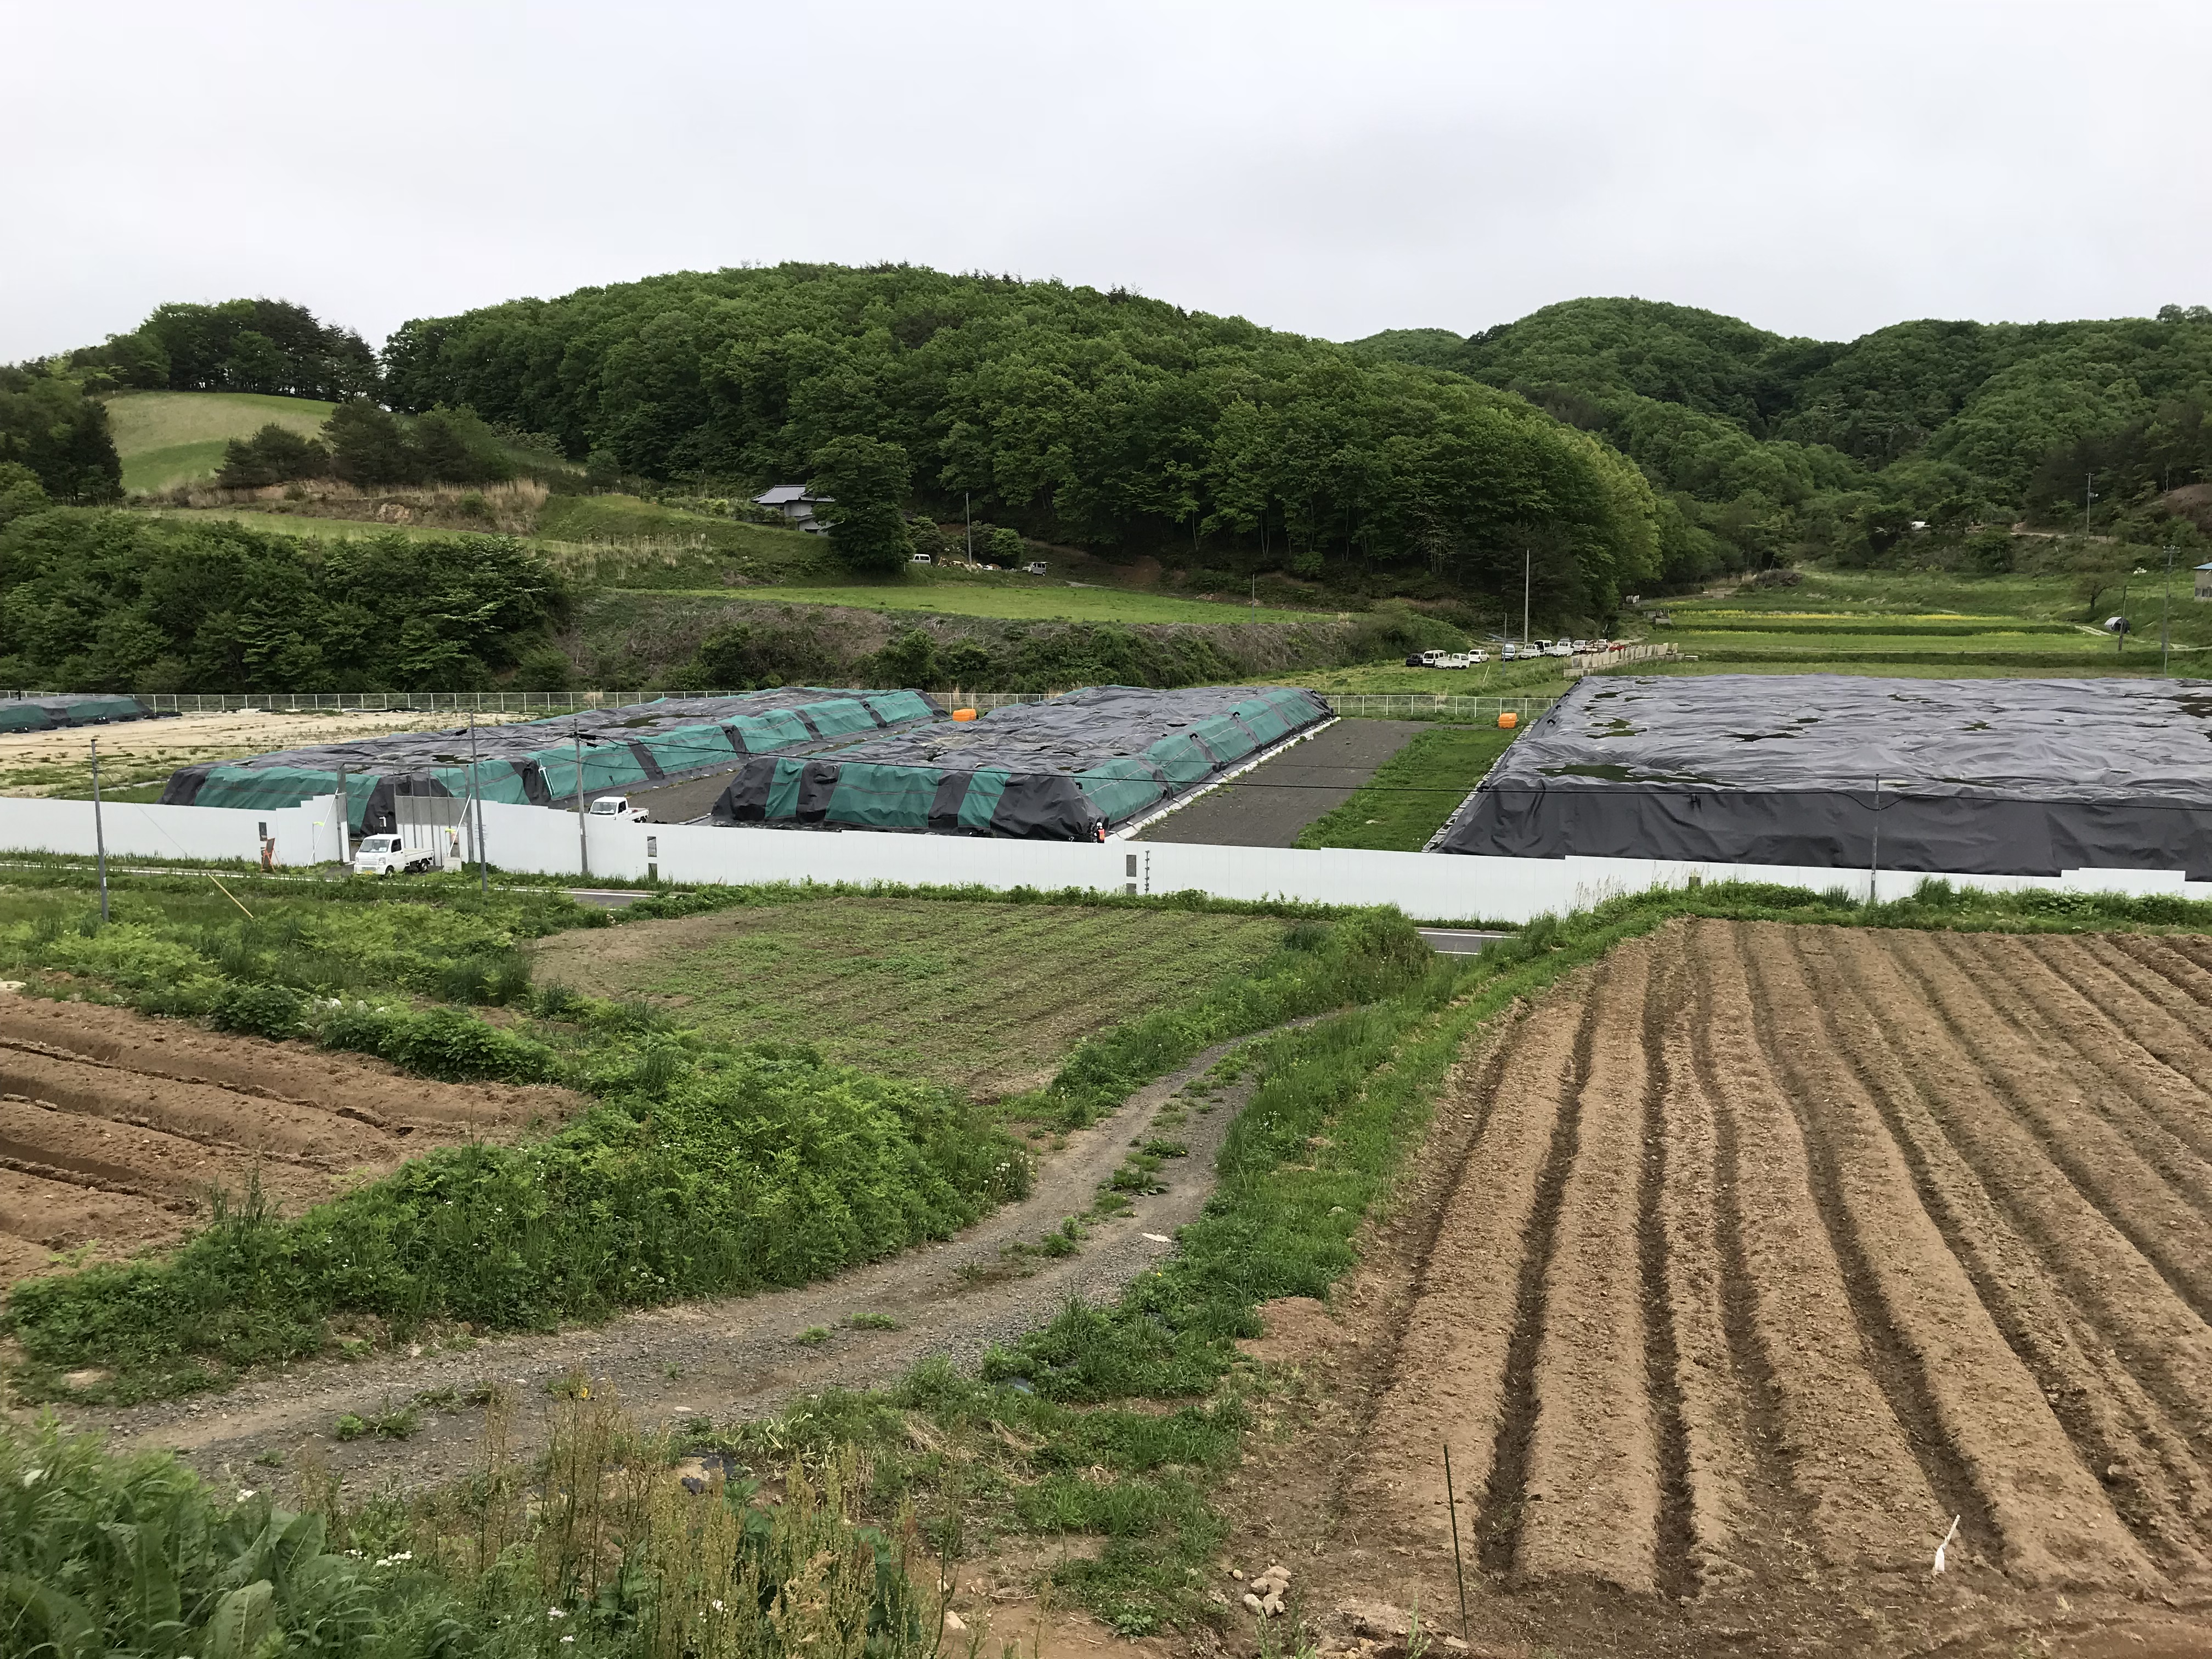 Temporarily stockpiled soil in Fukushima prefecture Japan, removed during decontamination work and awaiting transfer to an interim storage facility